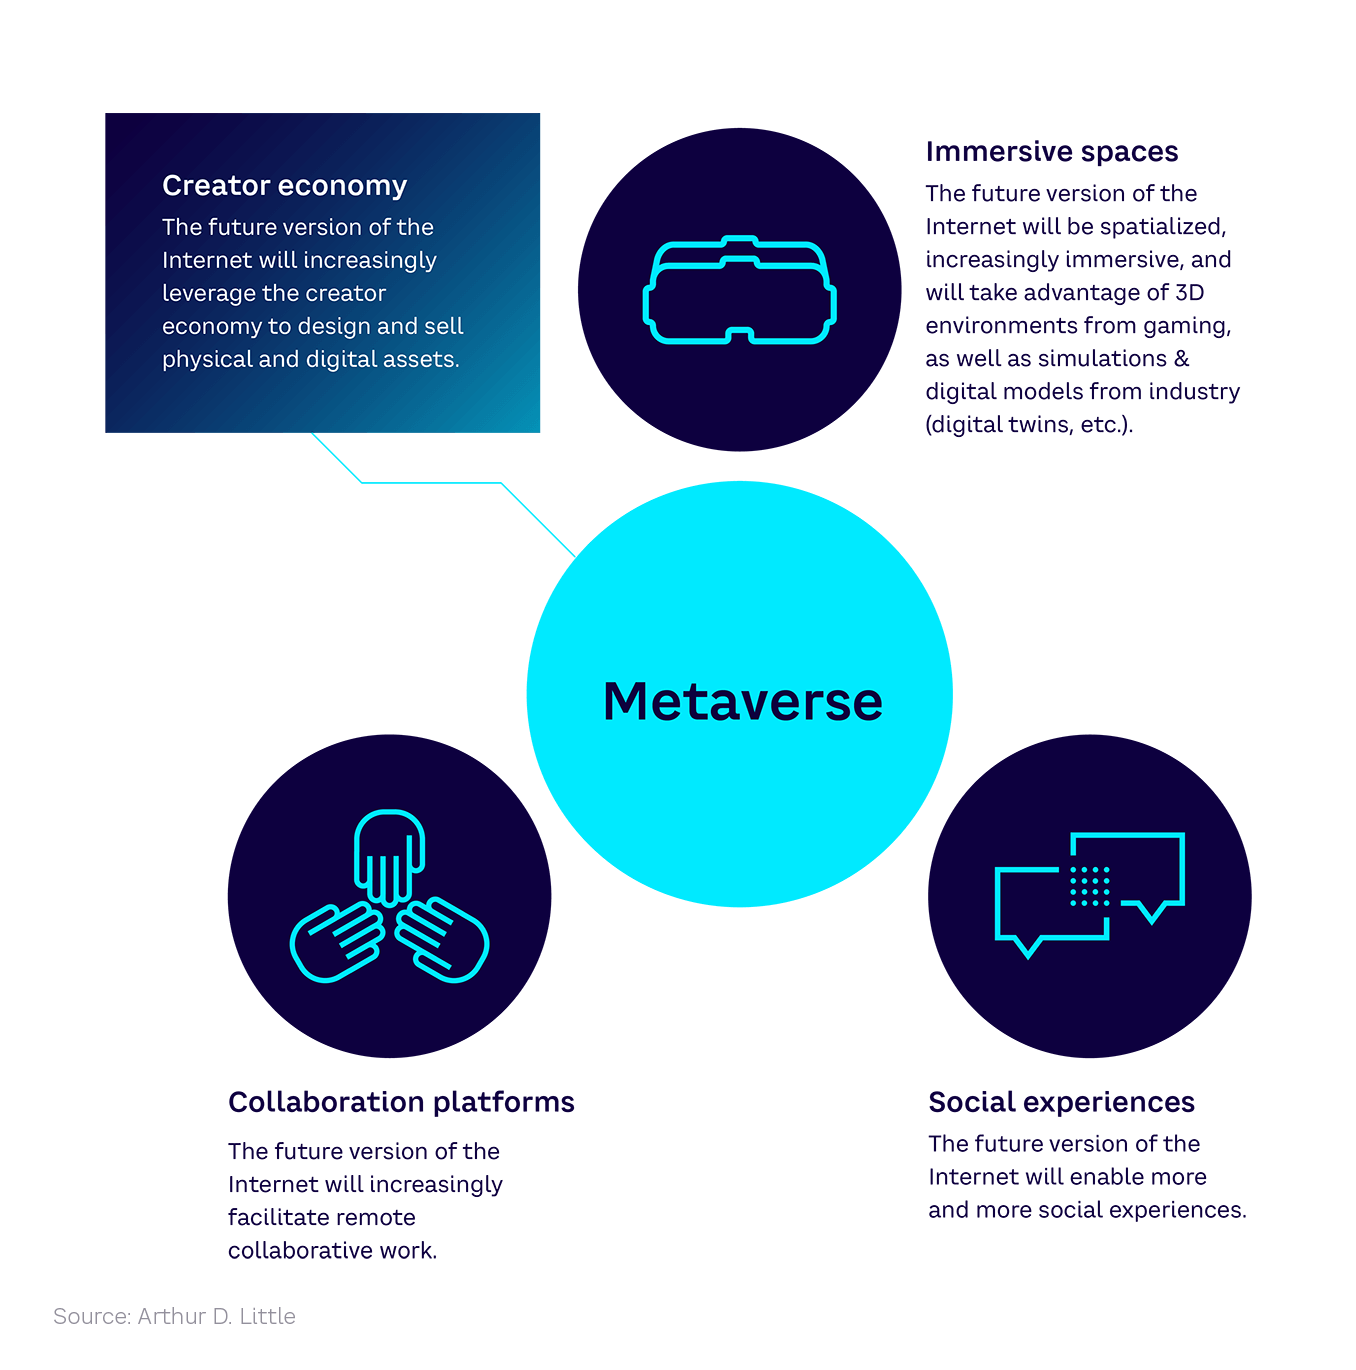 The Metaverse Explained